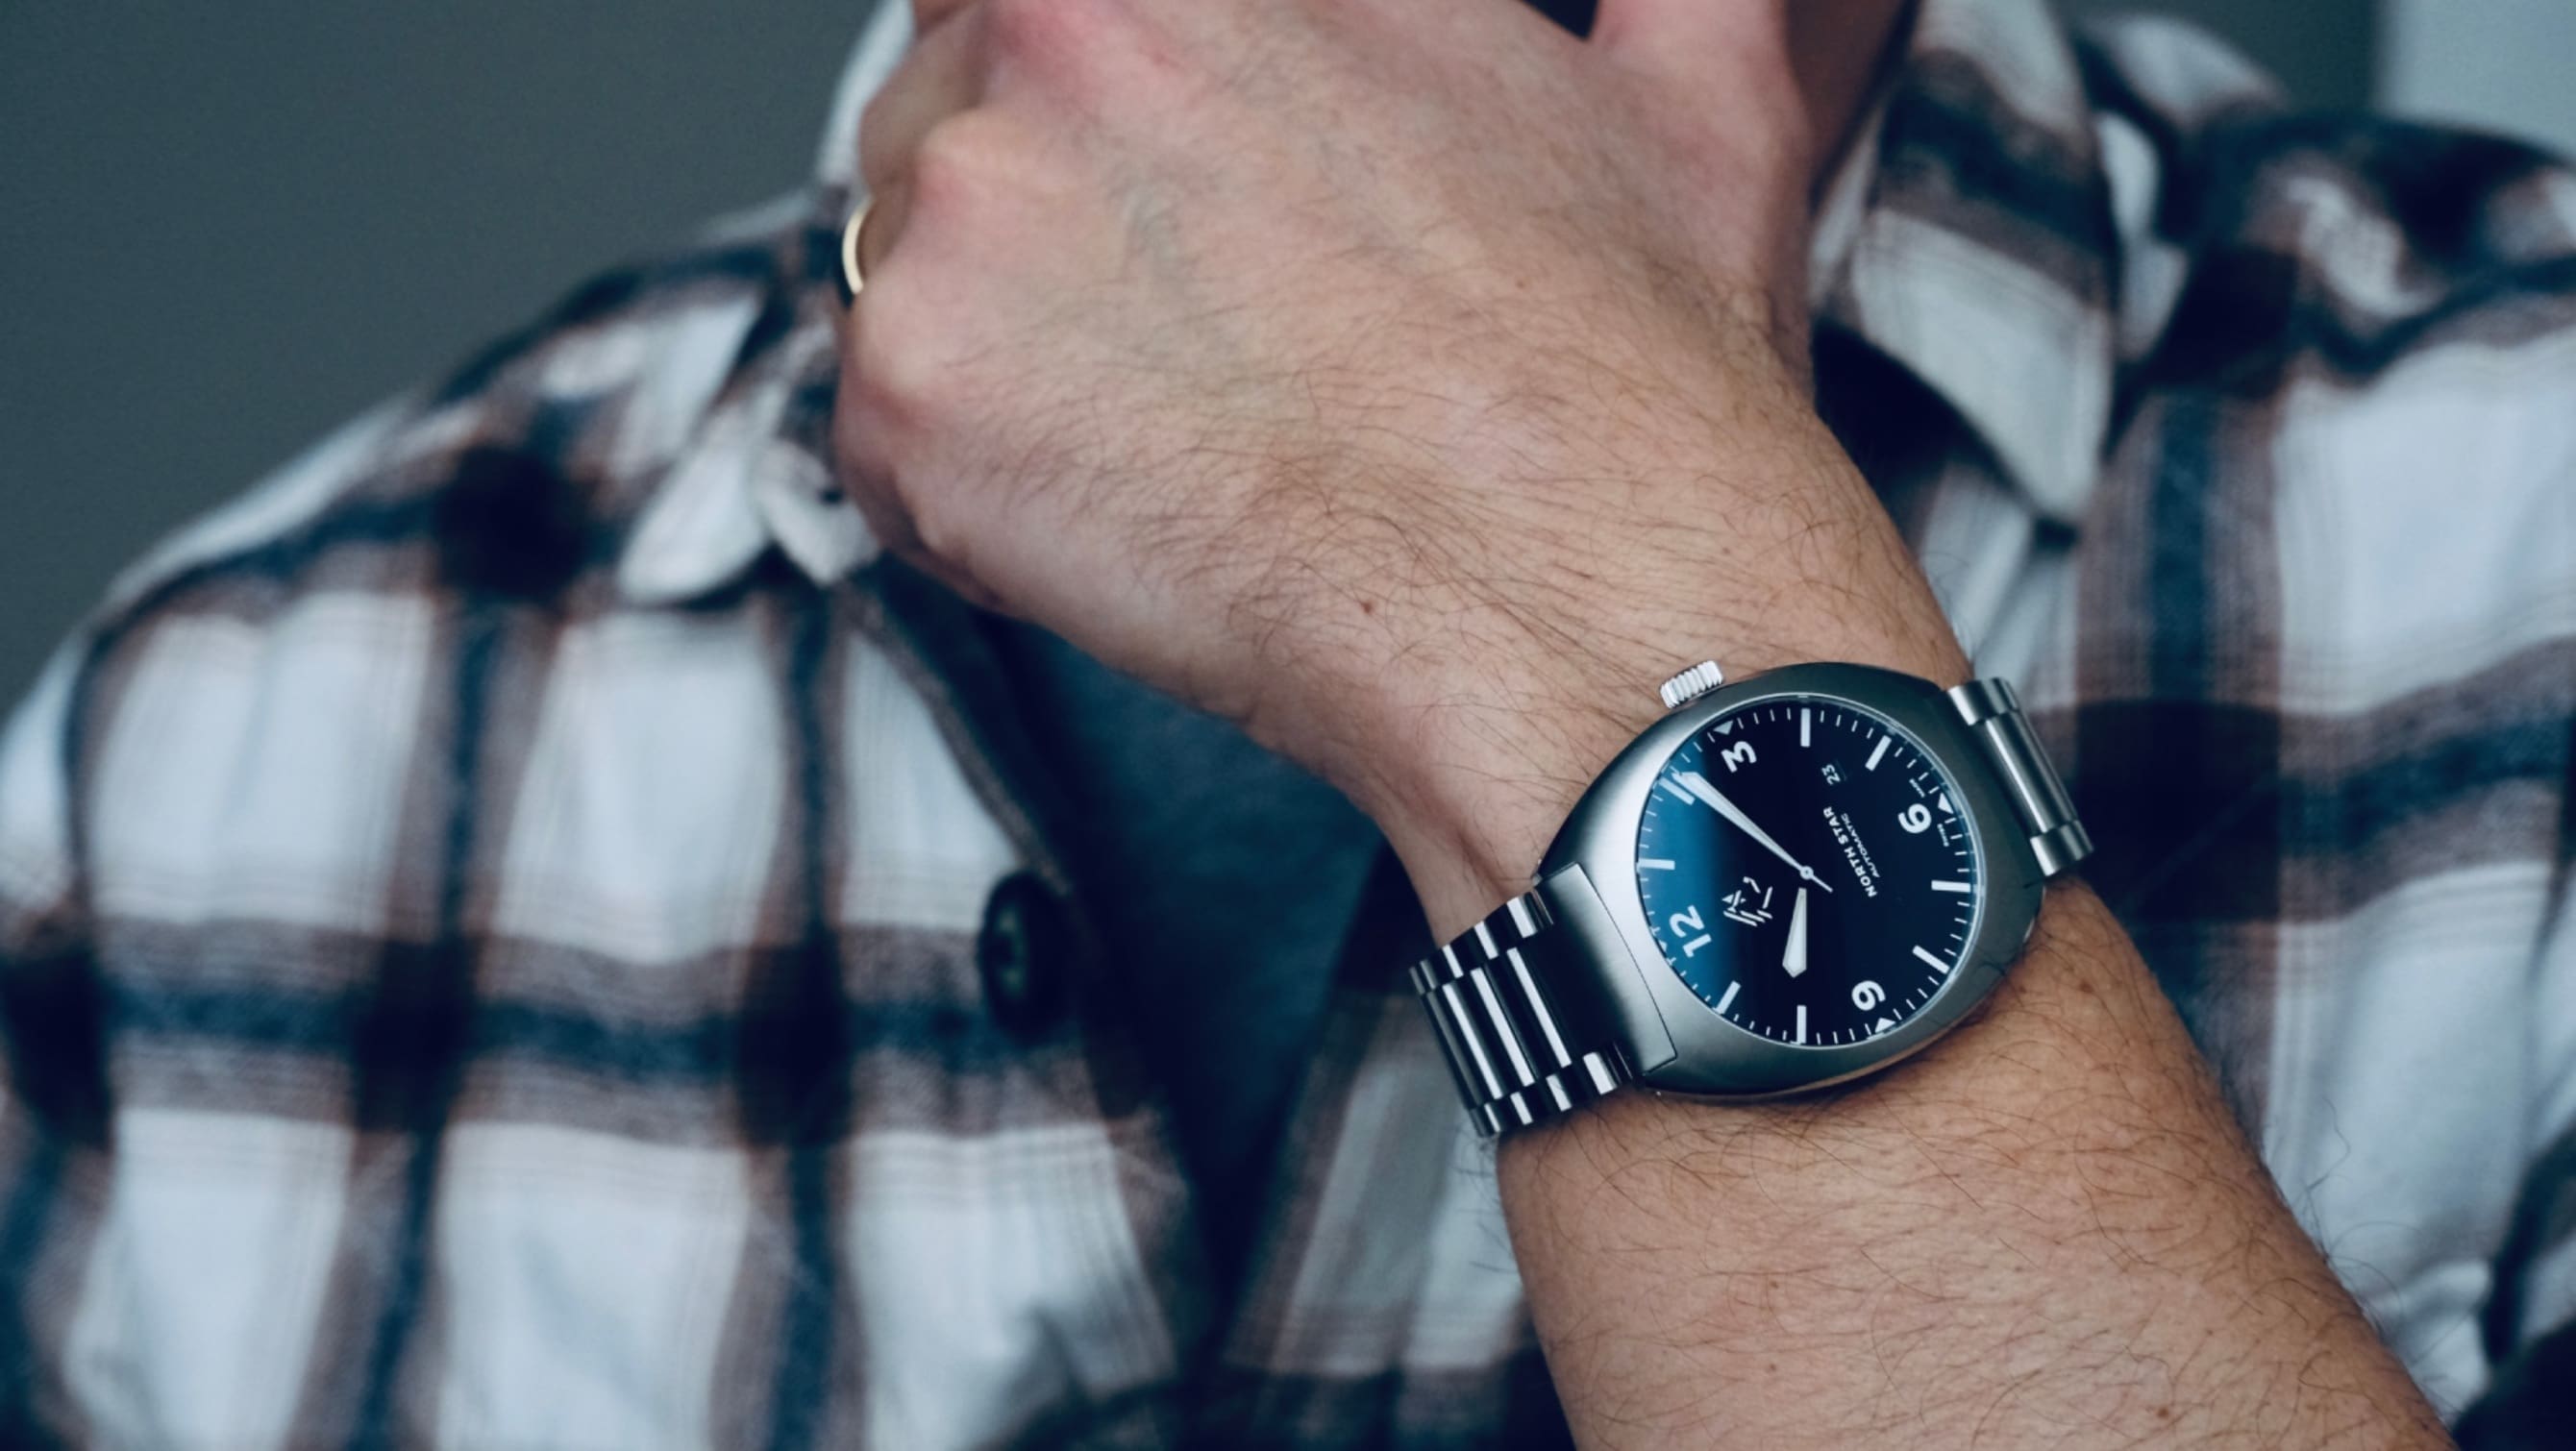 MICRO MONDAYS: Wolf Creek’s North Star is a daily wearer that’s ready for adventure